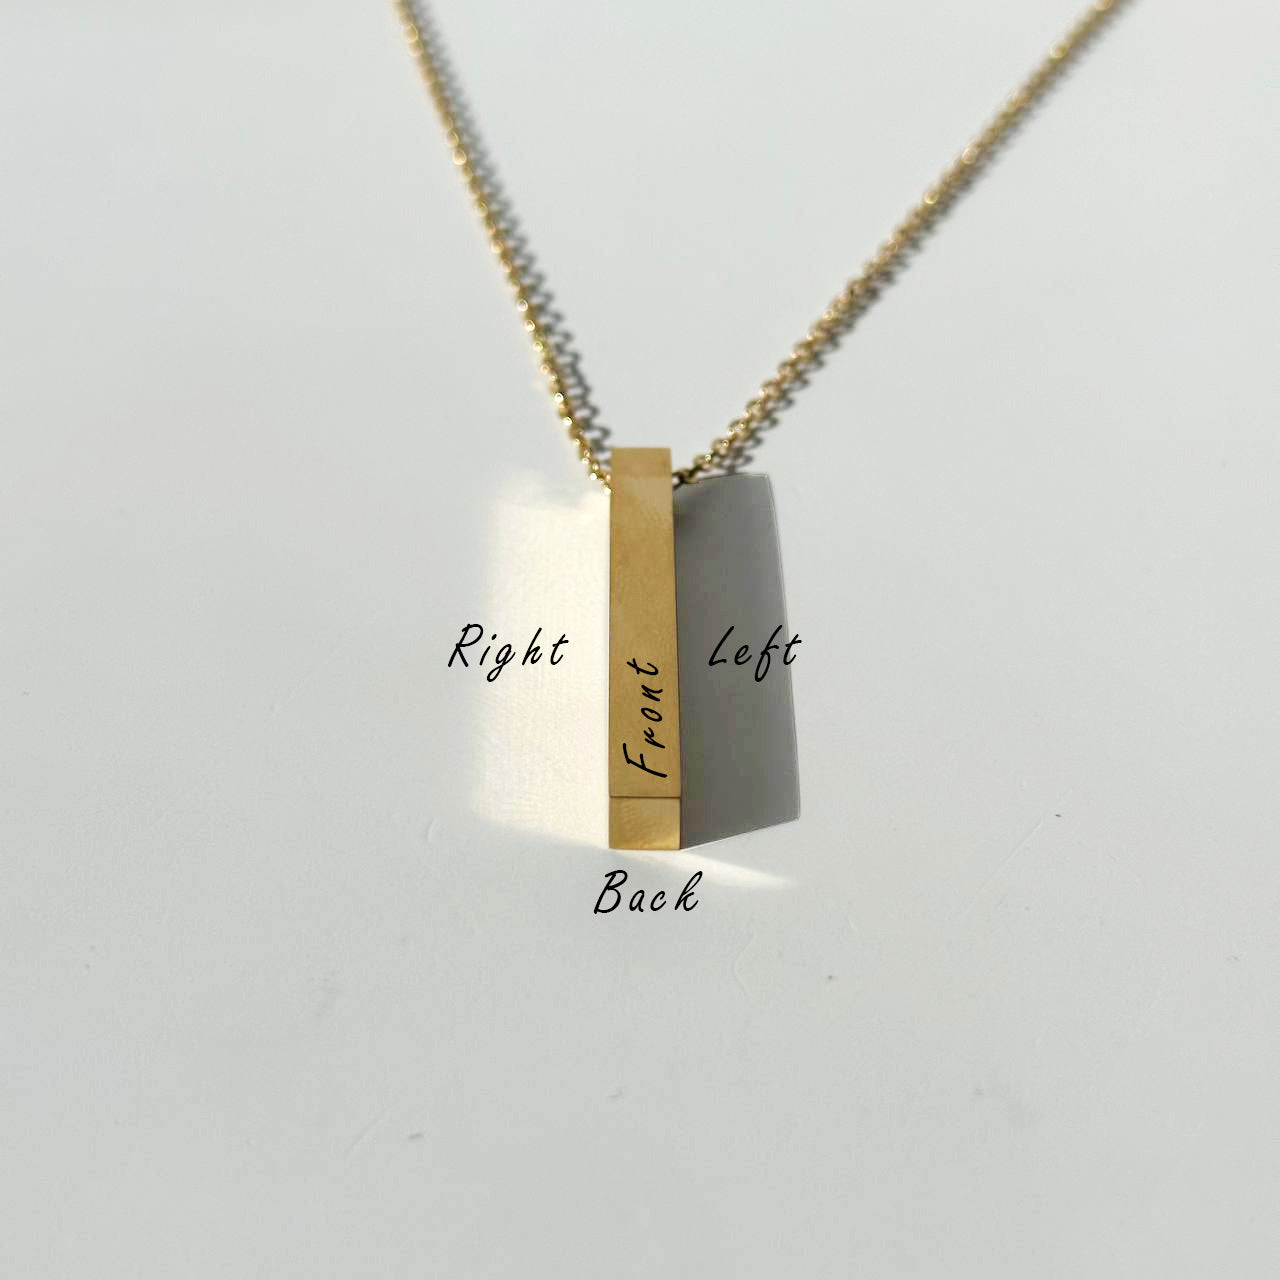 Personalised Special Date Gold Plated Heart Necklace - Ellie Ellie